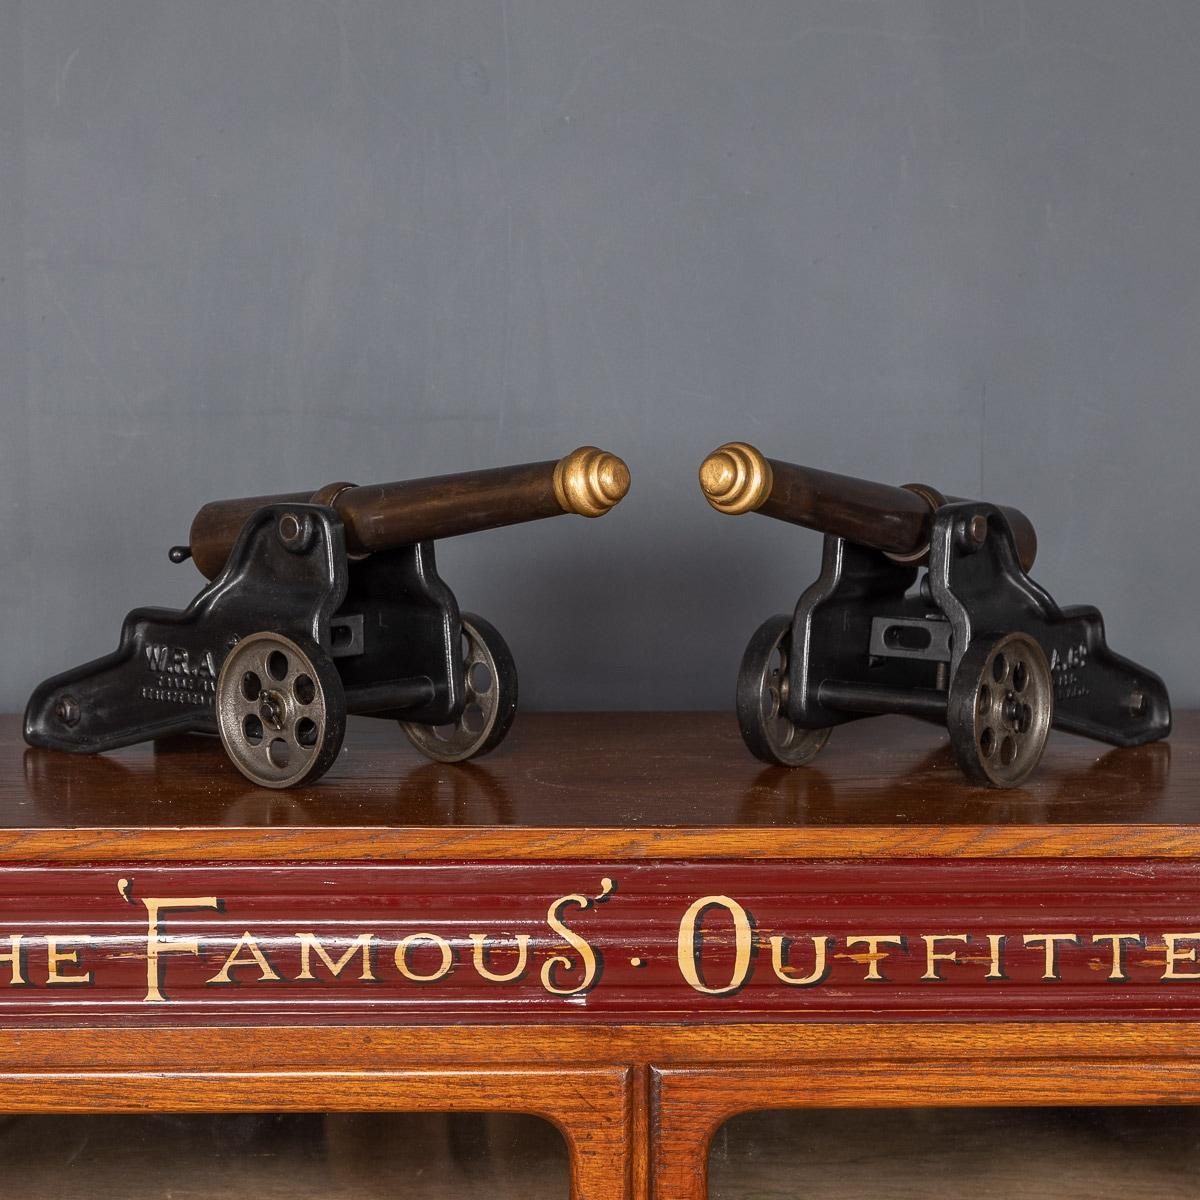 Antique 19th century American pair of solid bronze Winchester signal cannons on iron bases, these were given to the Yacht Master at Selcombe Yacht Club, and used to start many of the boat races, decommissioned in 1936. This items makes for a